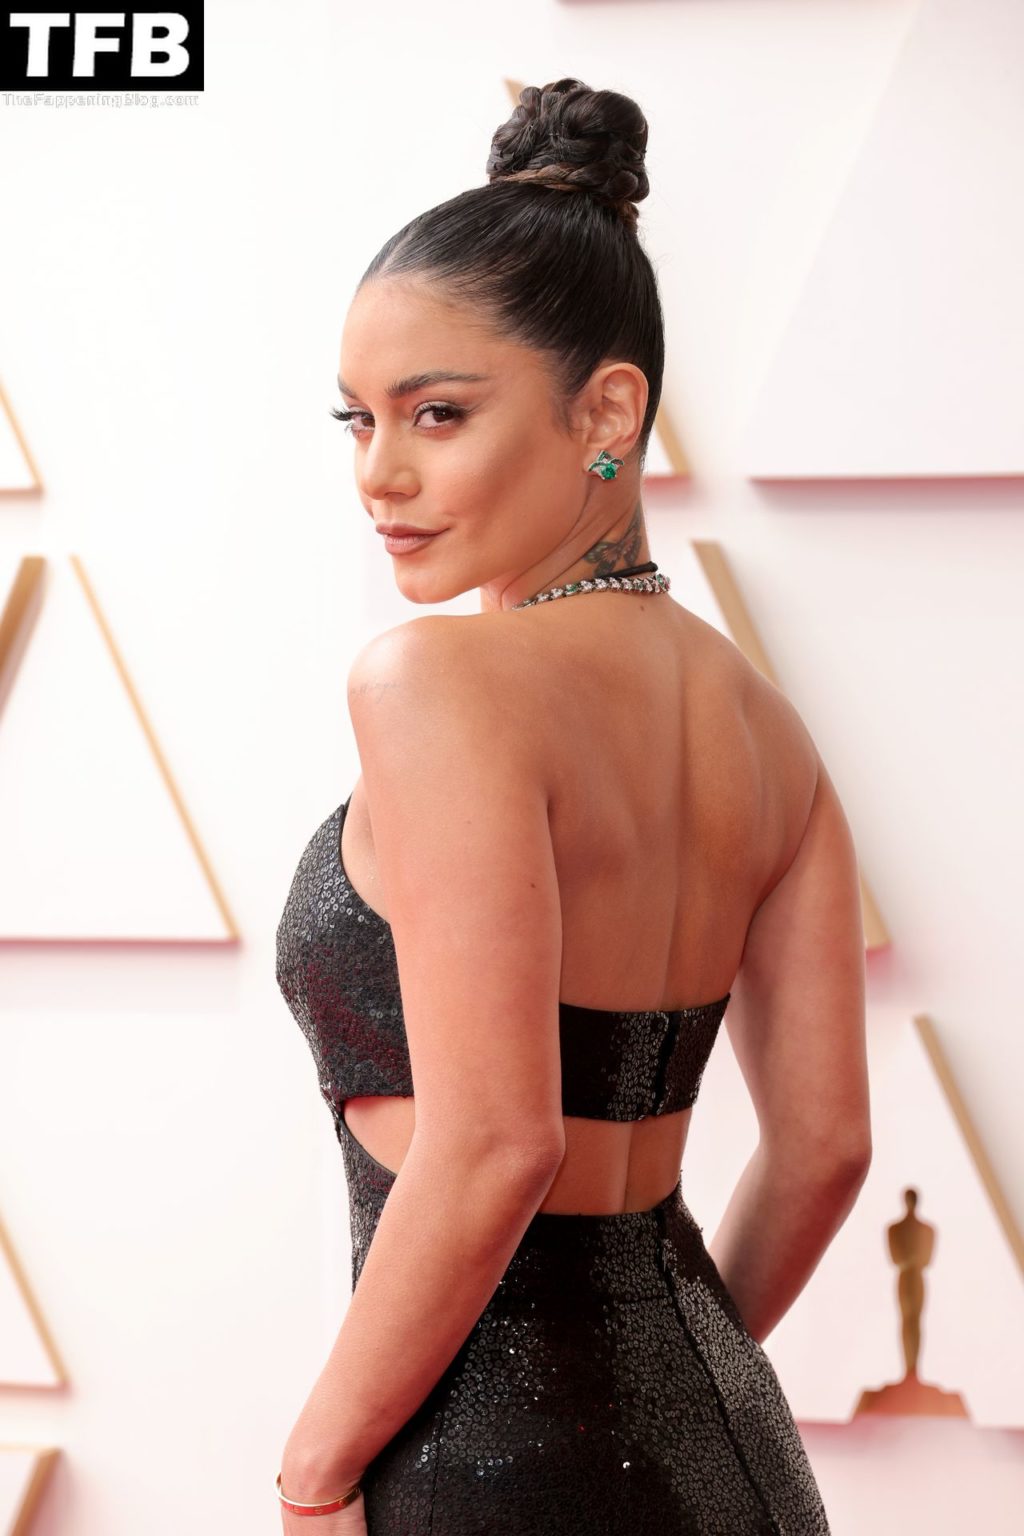 Vanessa Hudgens Sexy The Fappening Blog 44 3 1024x1536 - Vanessa Hudgens Poses on the Red Carpet at the 94th Annual Academy Awards (83 Photos)